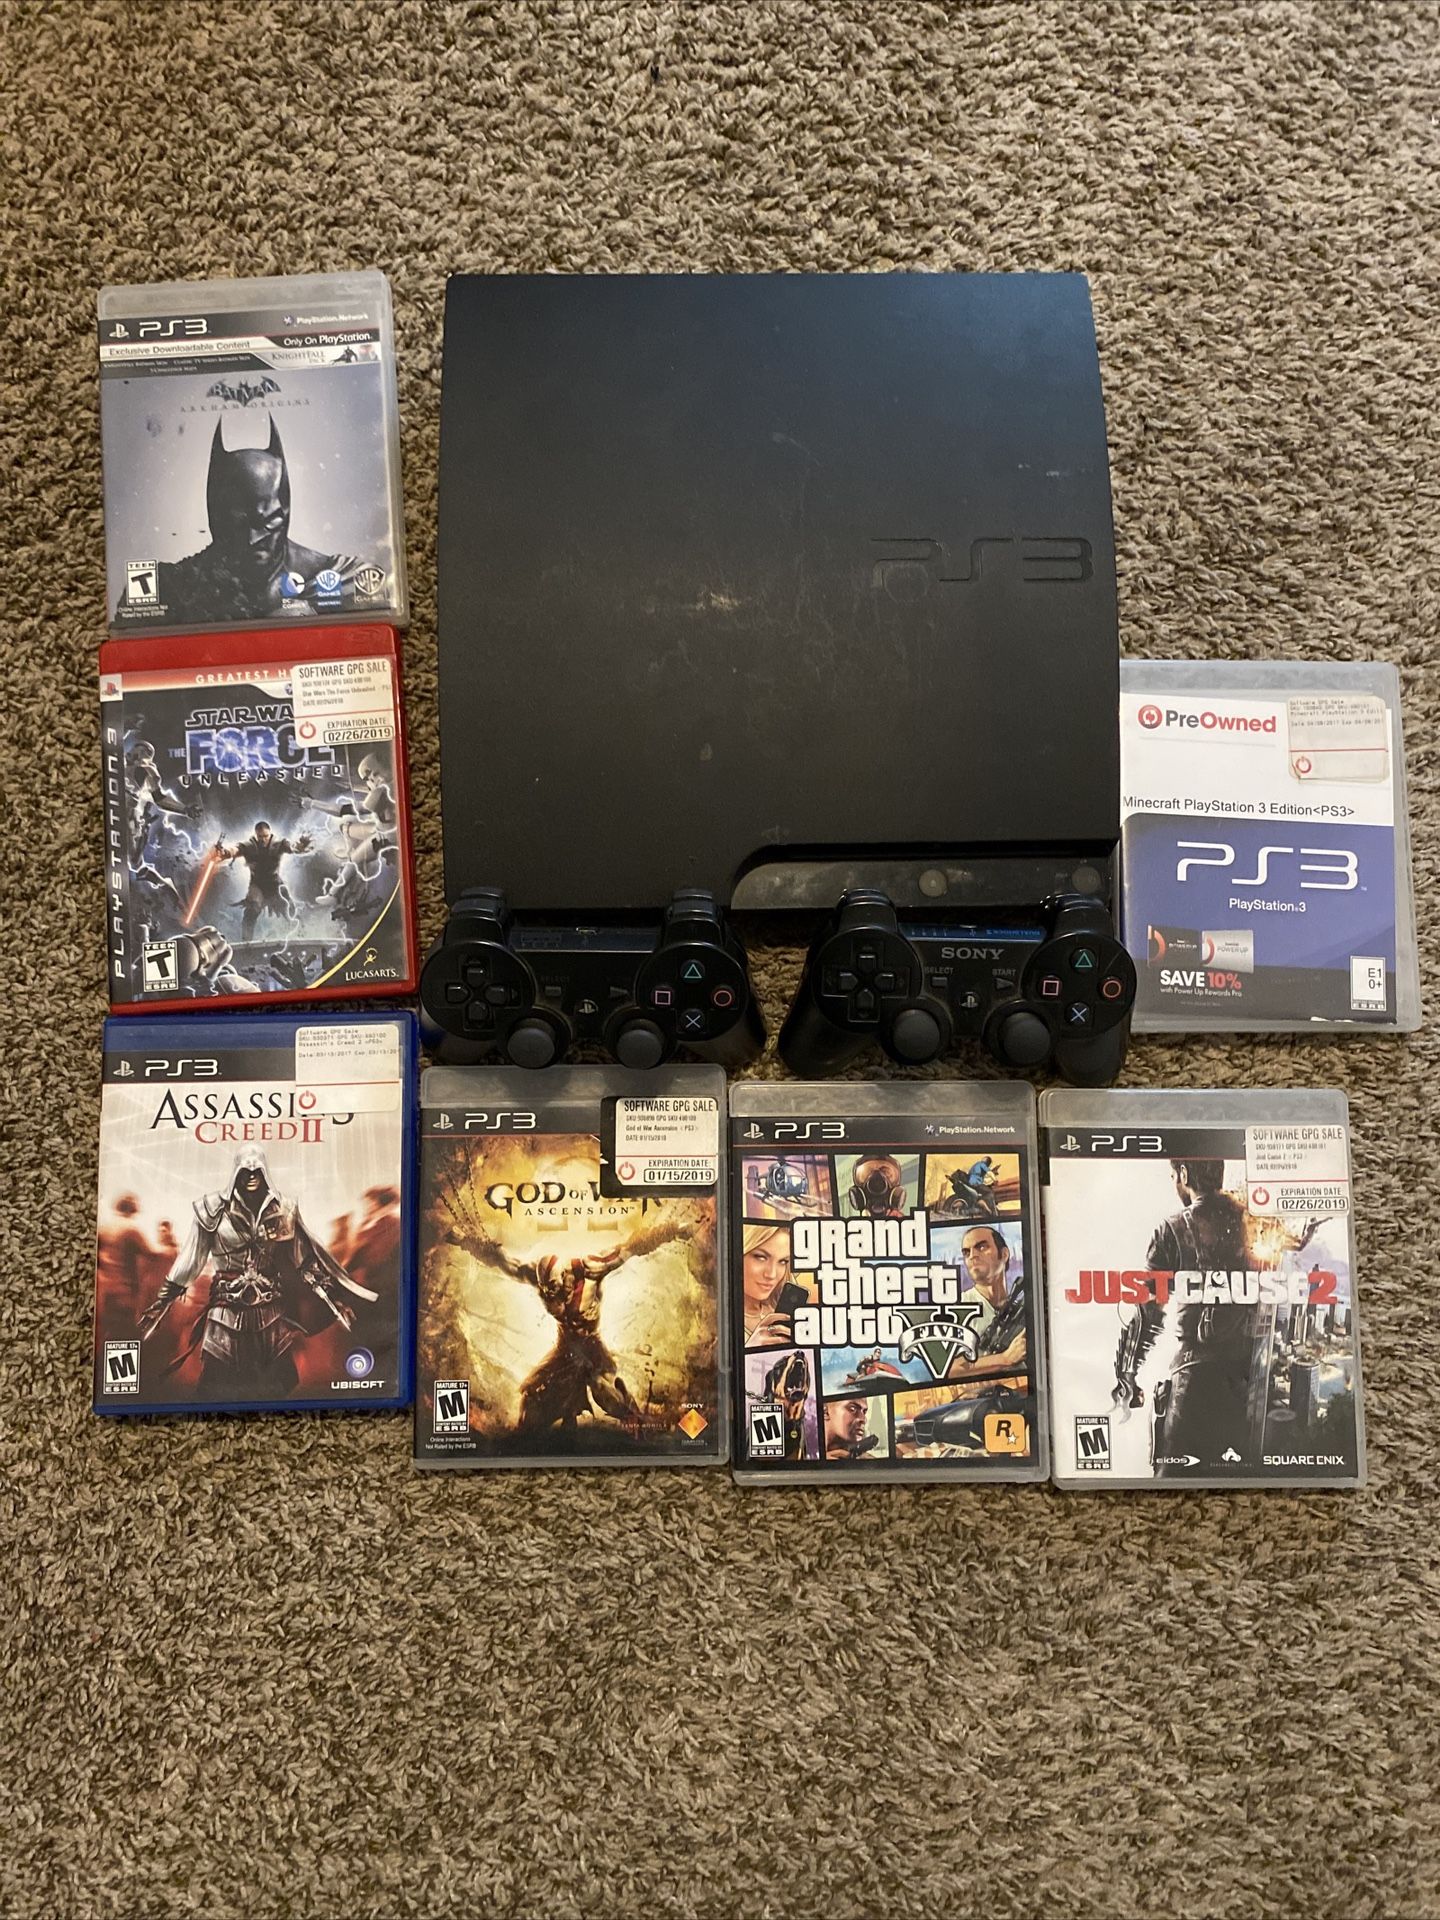 160GB PlayStation 3 With 7 Games And 3 Controllers